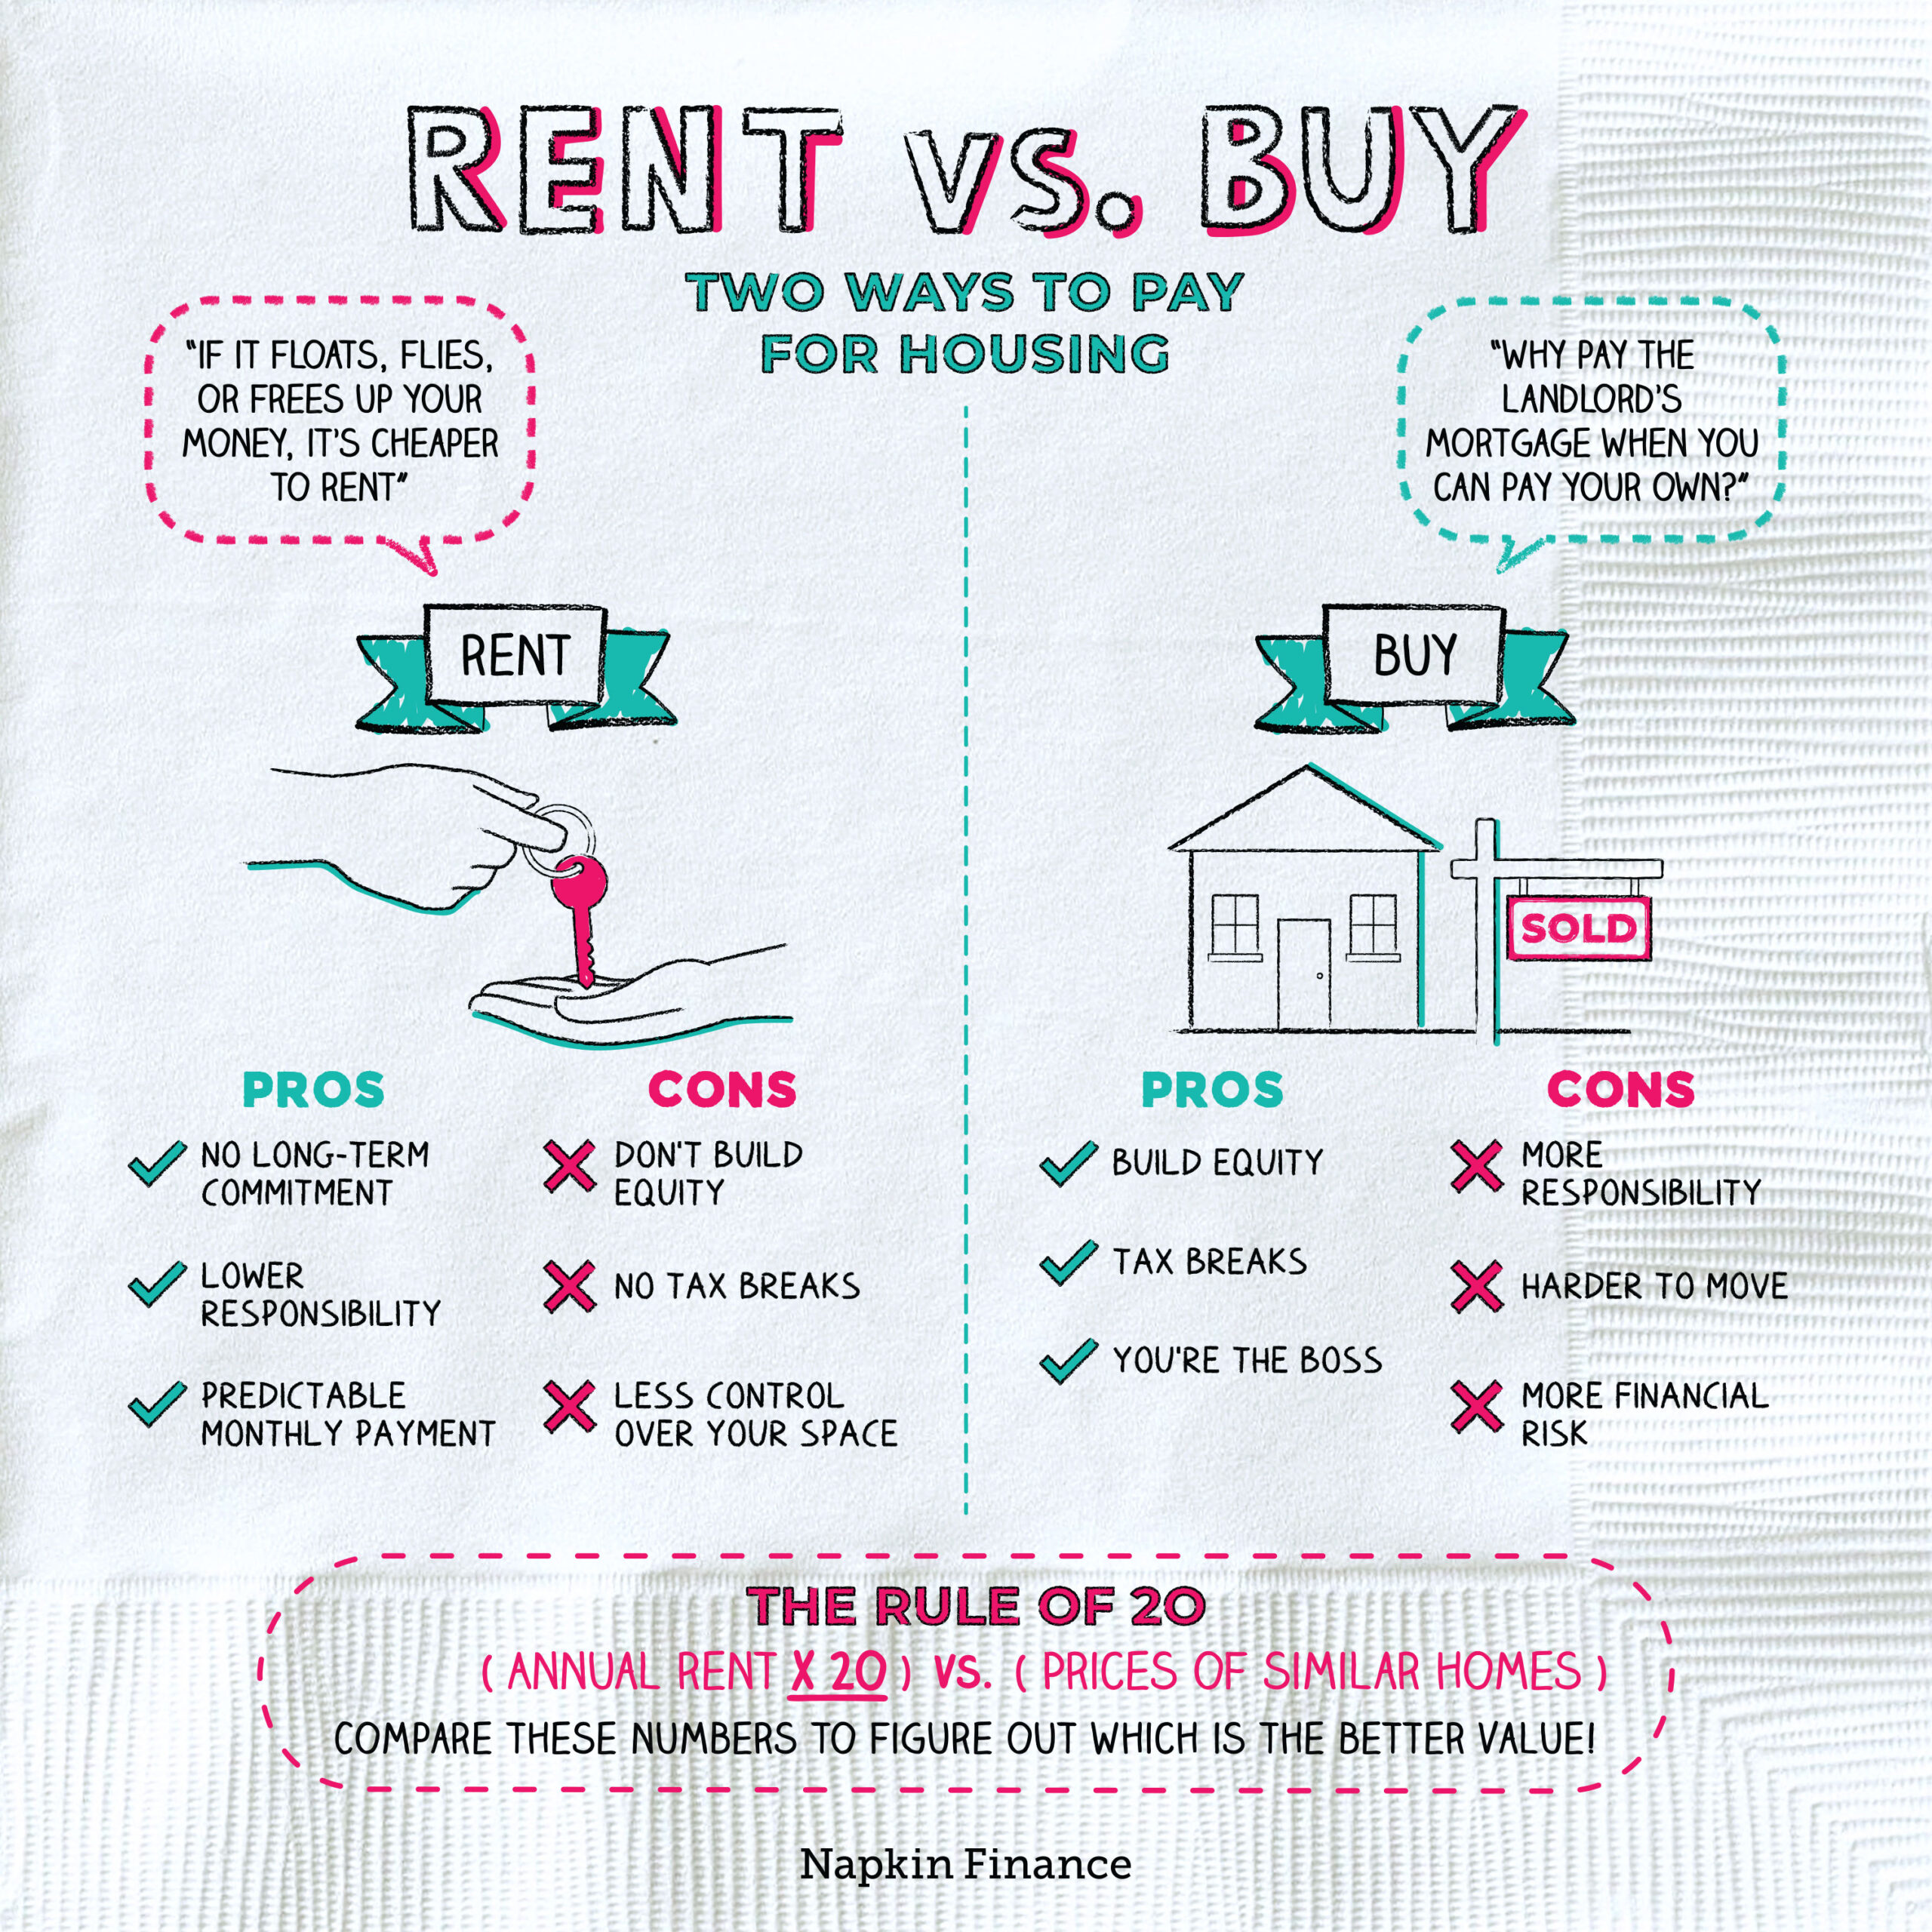 How to Save Money By Renting Luxury Goods vs. Buying